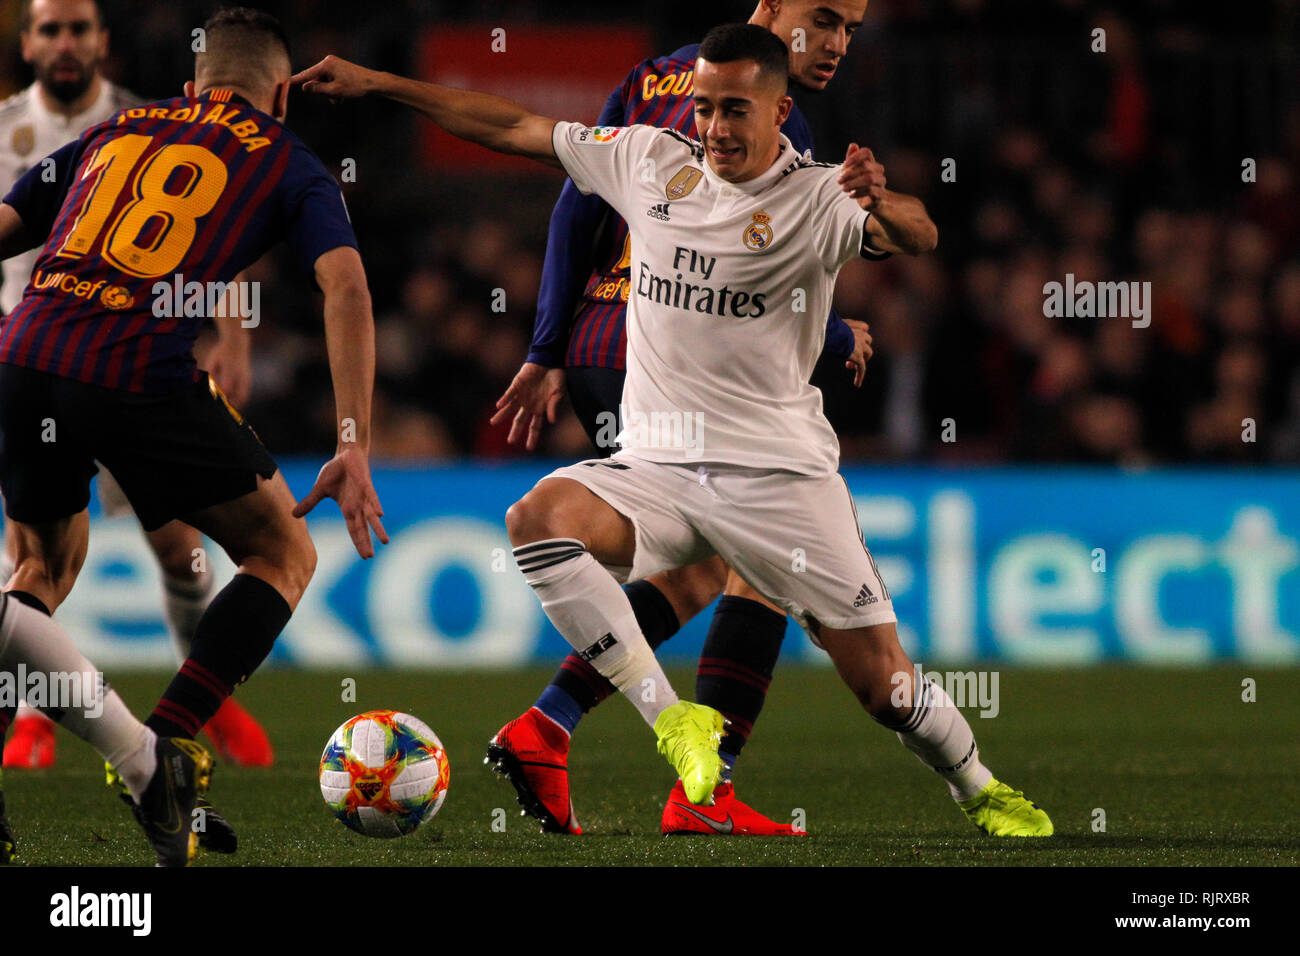 Spain La Copa, Semi finals, First Leg, FC Barcelona vs. Real Madrid, reporting live during the game -- Lucas Vazquez Spanish winger for Real Madrid duels for a ball during the game Stock Photo